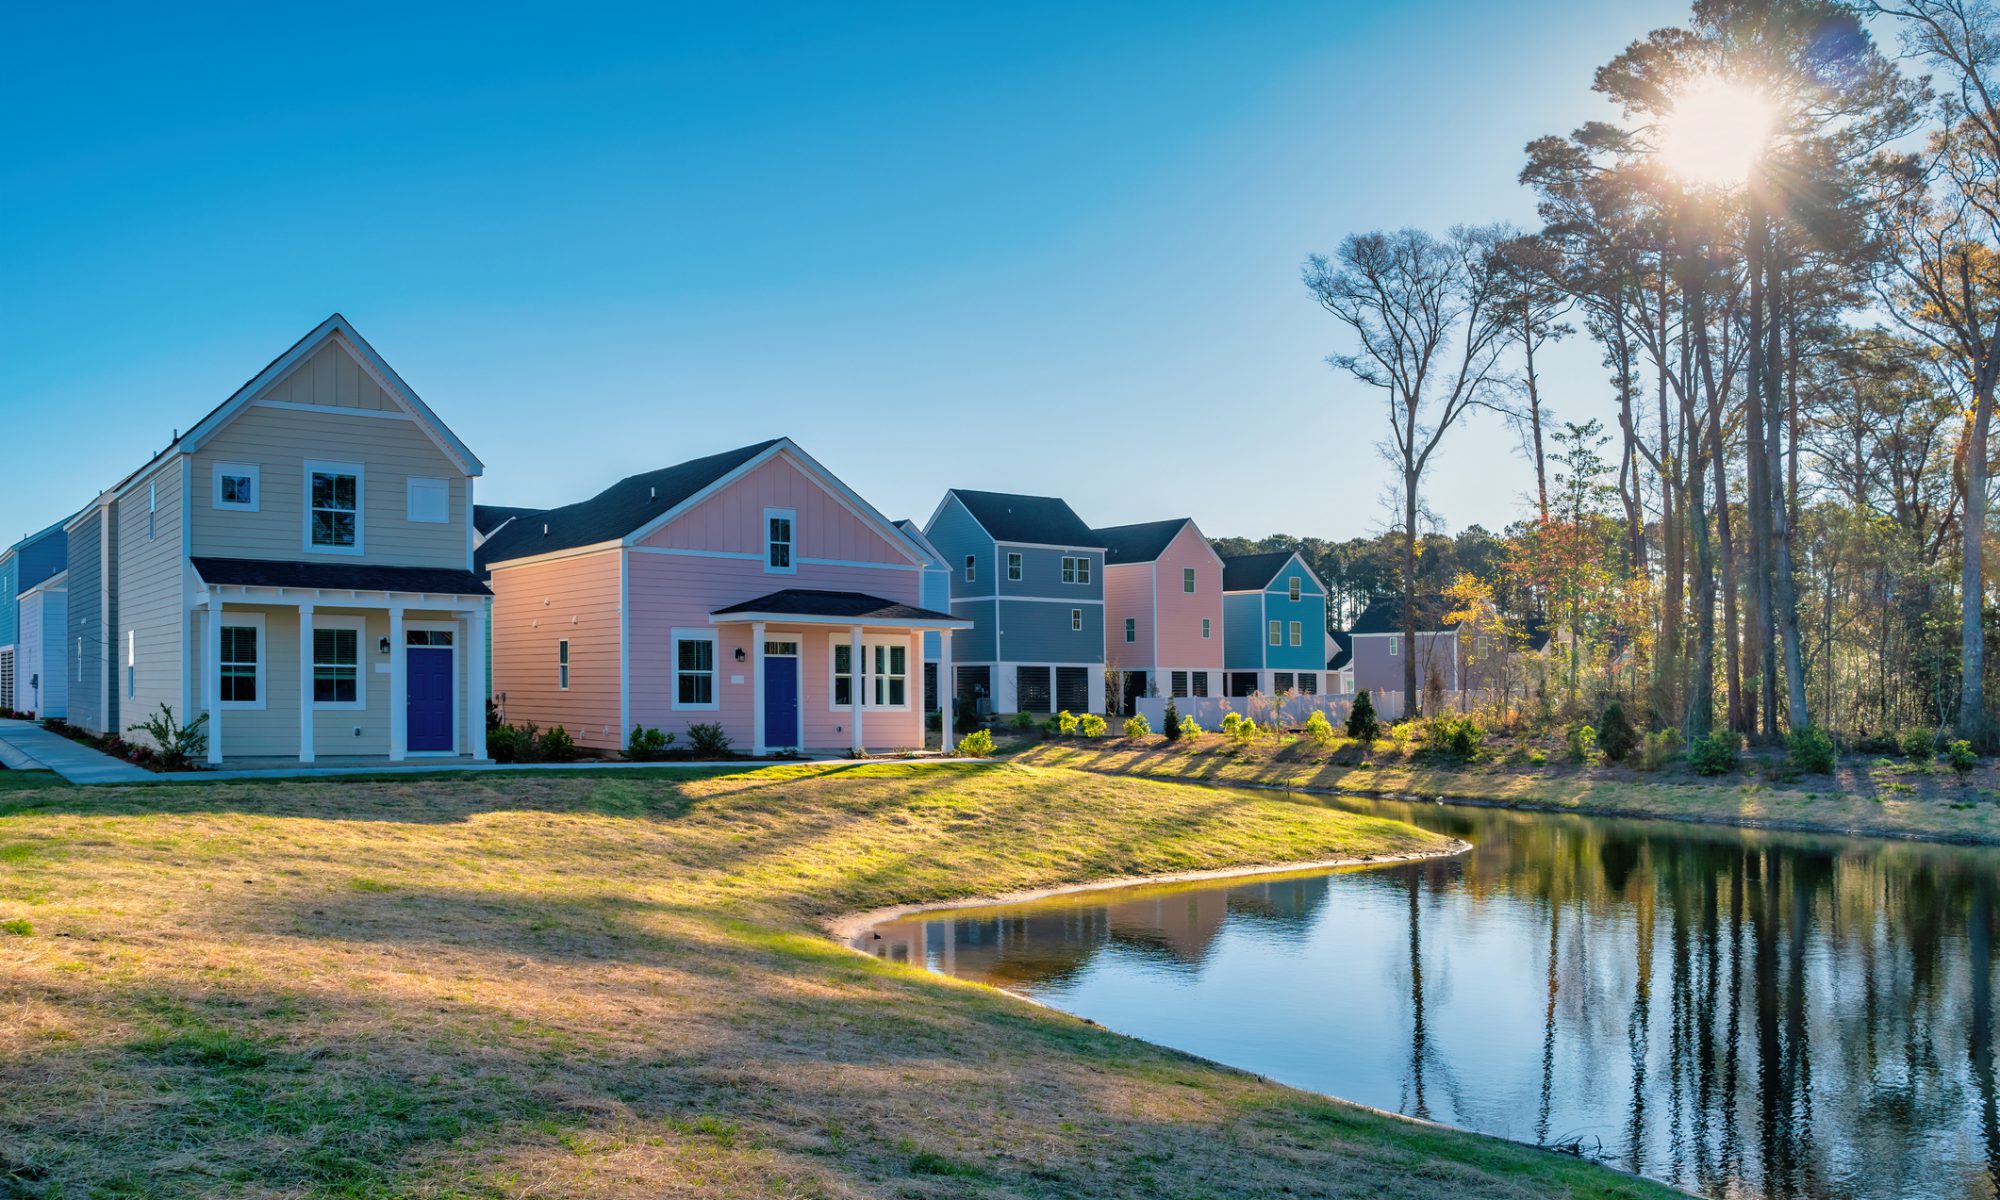 New detached houses in a residential district in Myrtle Beach, South Carolina, USA on a sunny day.